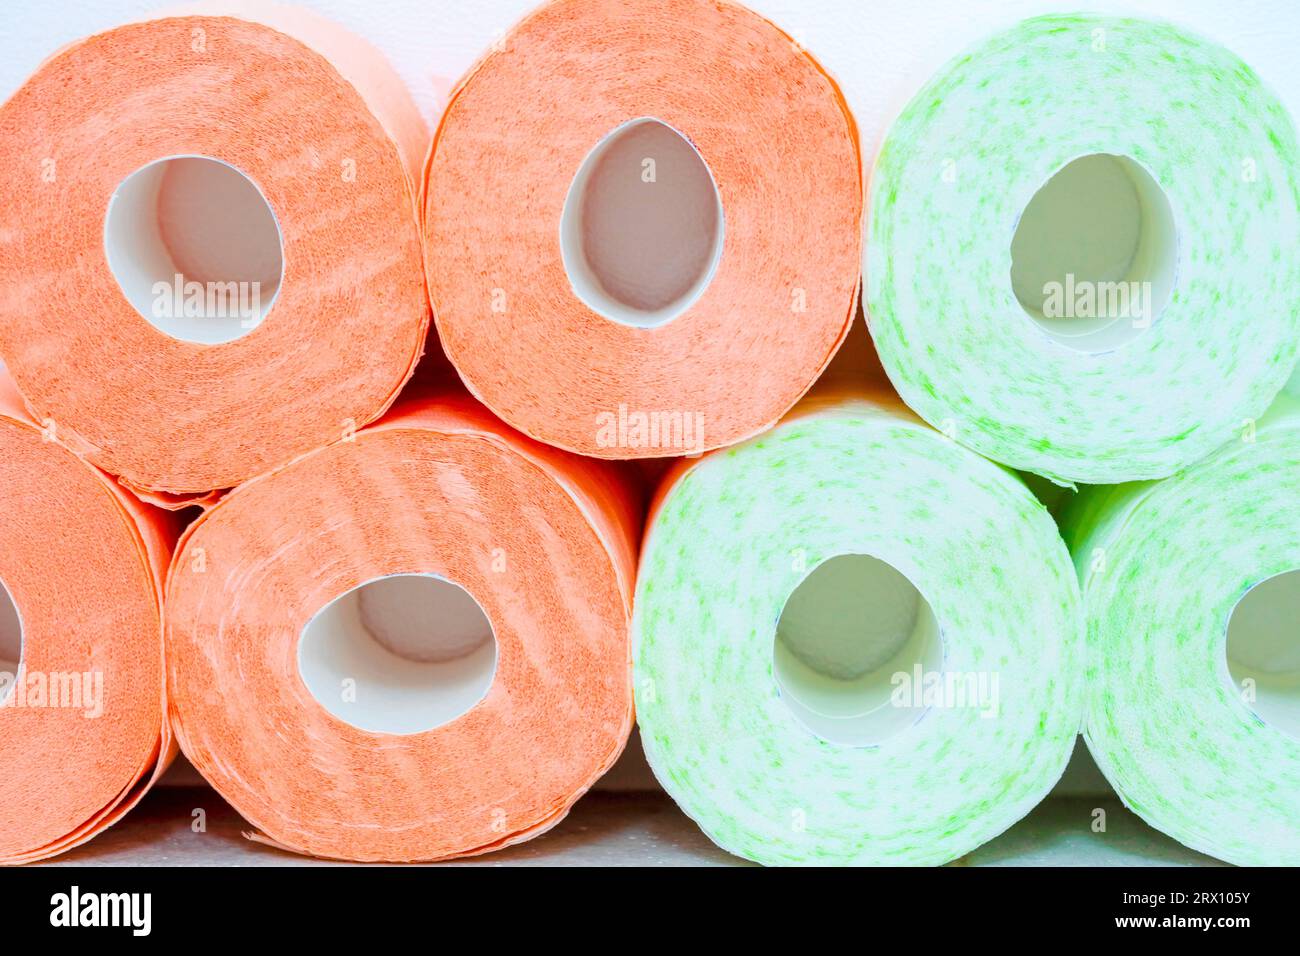 Different types of toilet paper background. Rolls of two colors. Rows of Toilet Coils close up. Stock Photo